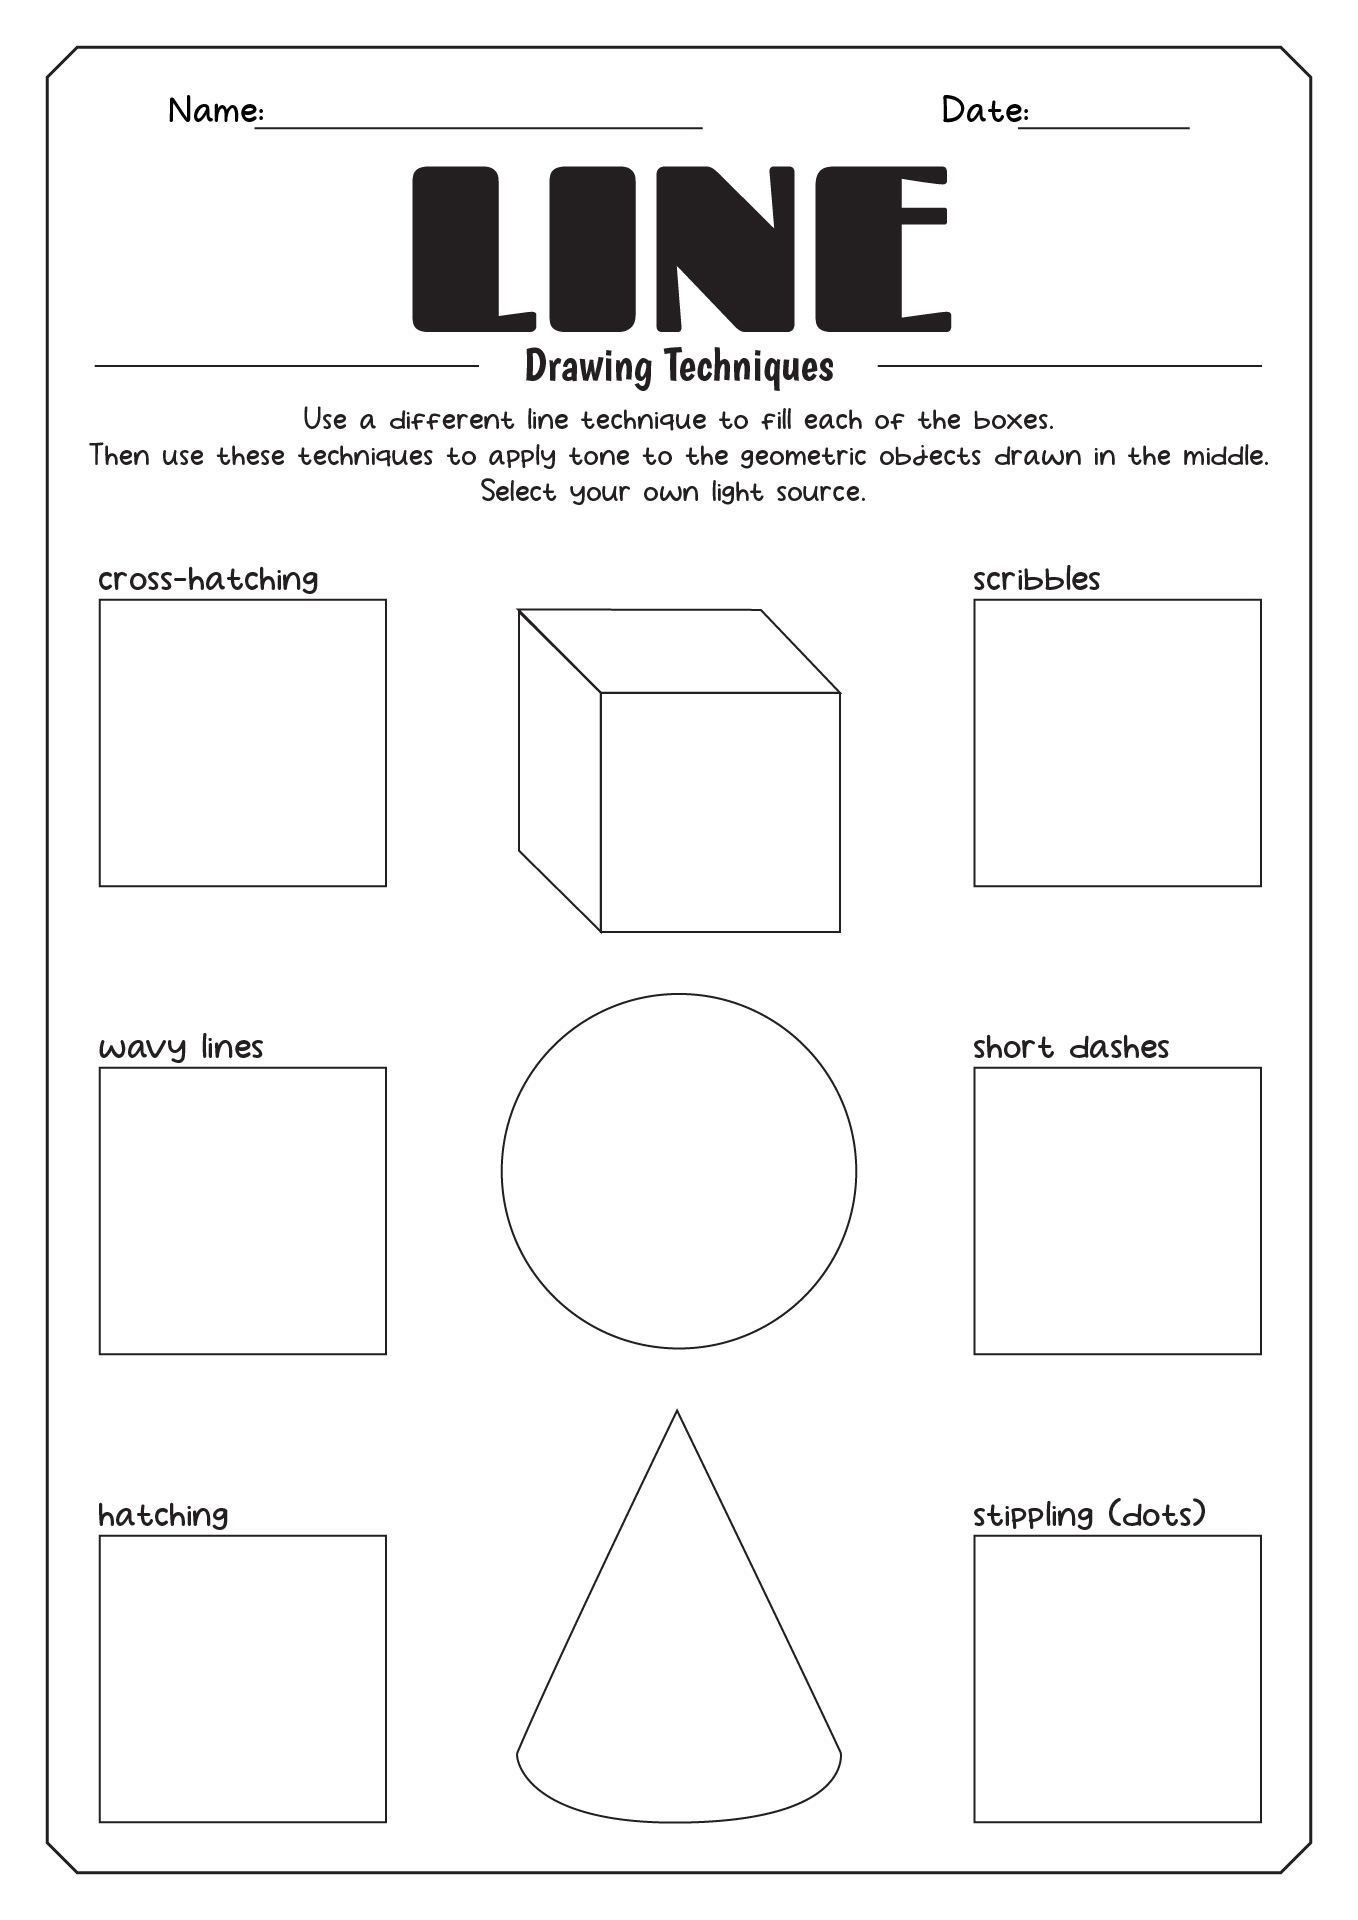 Line Drawing Techniques Worksheet